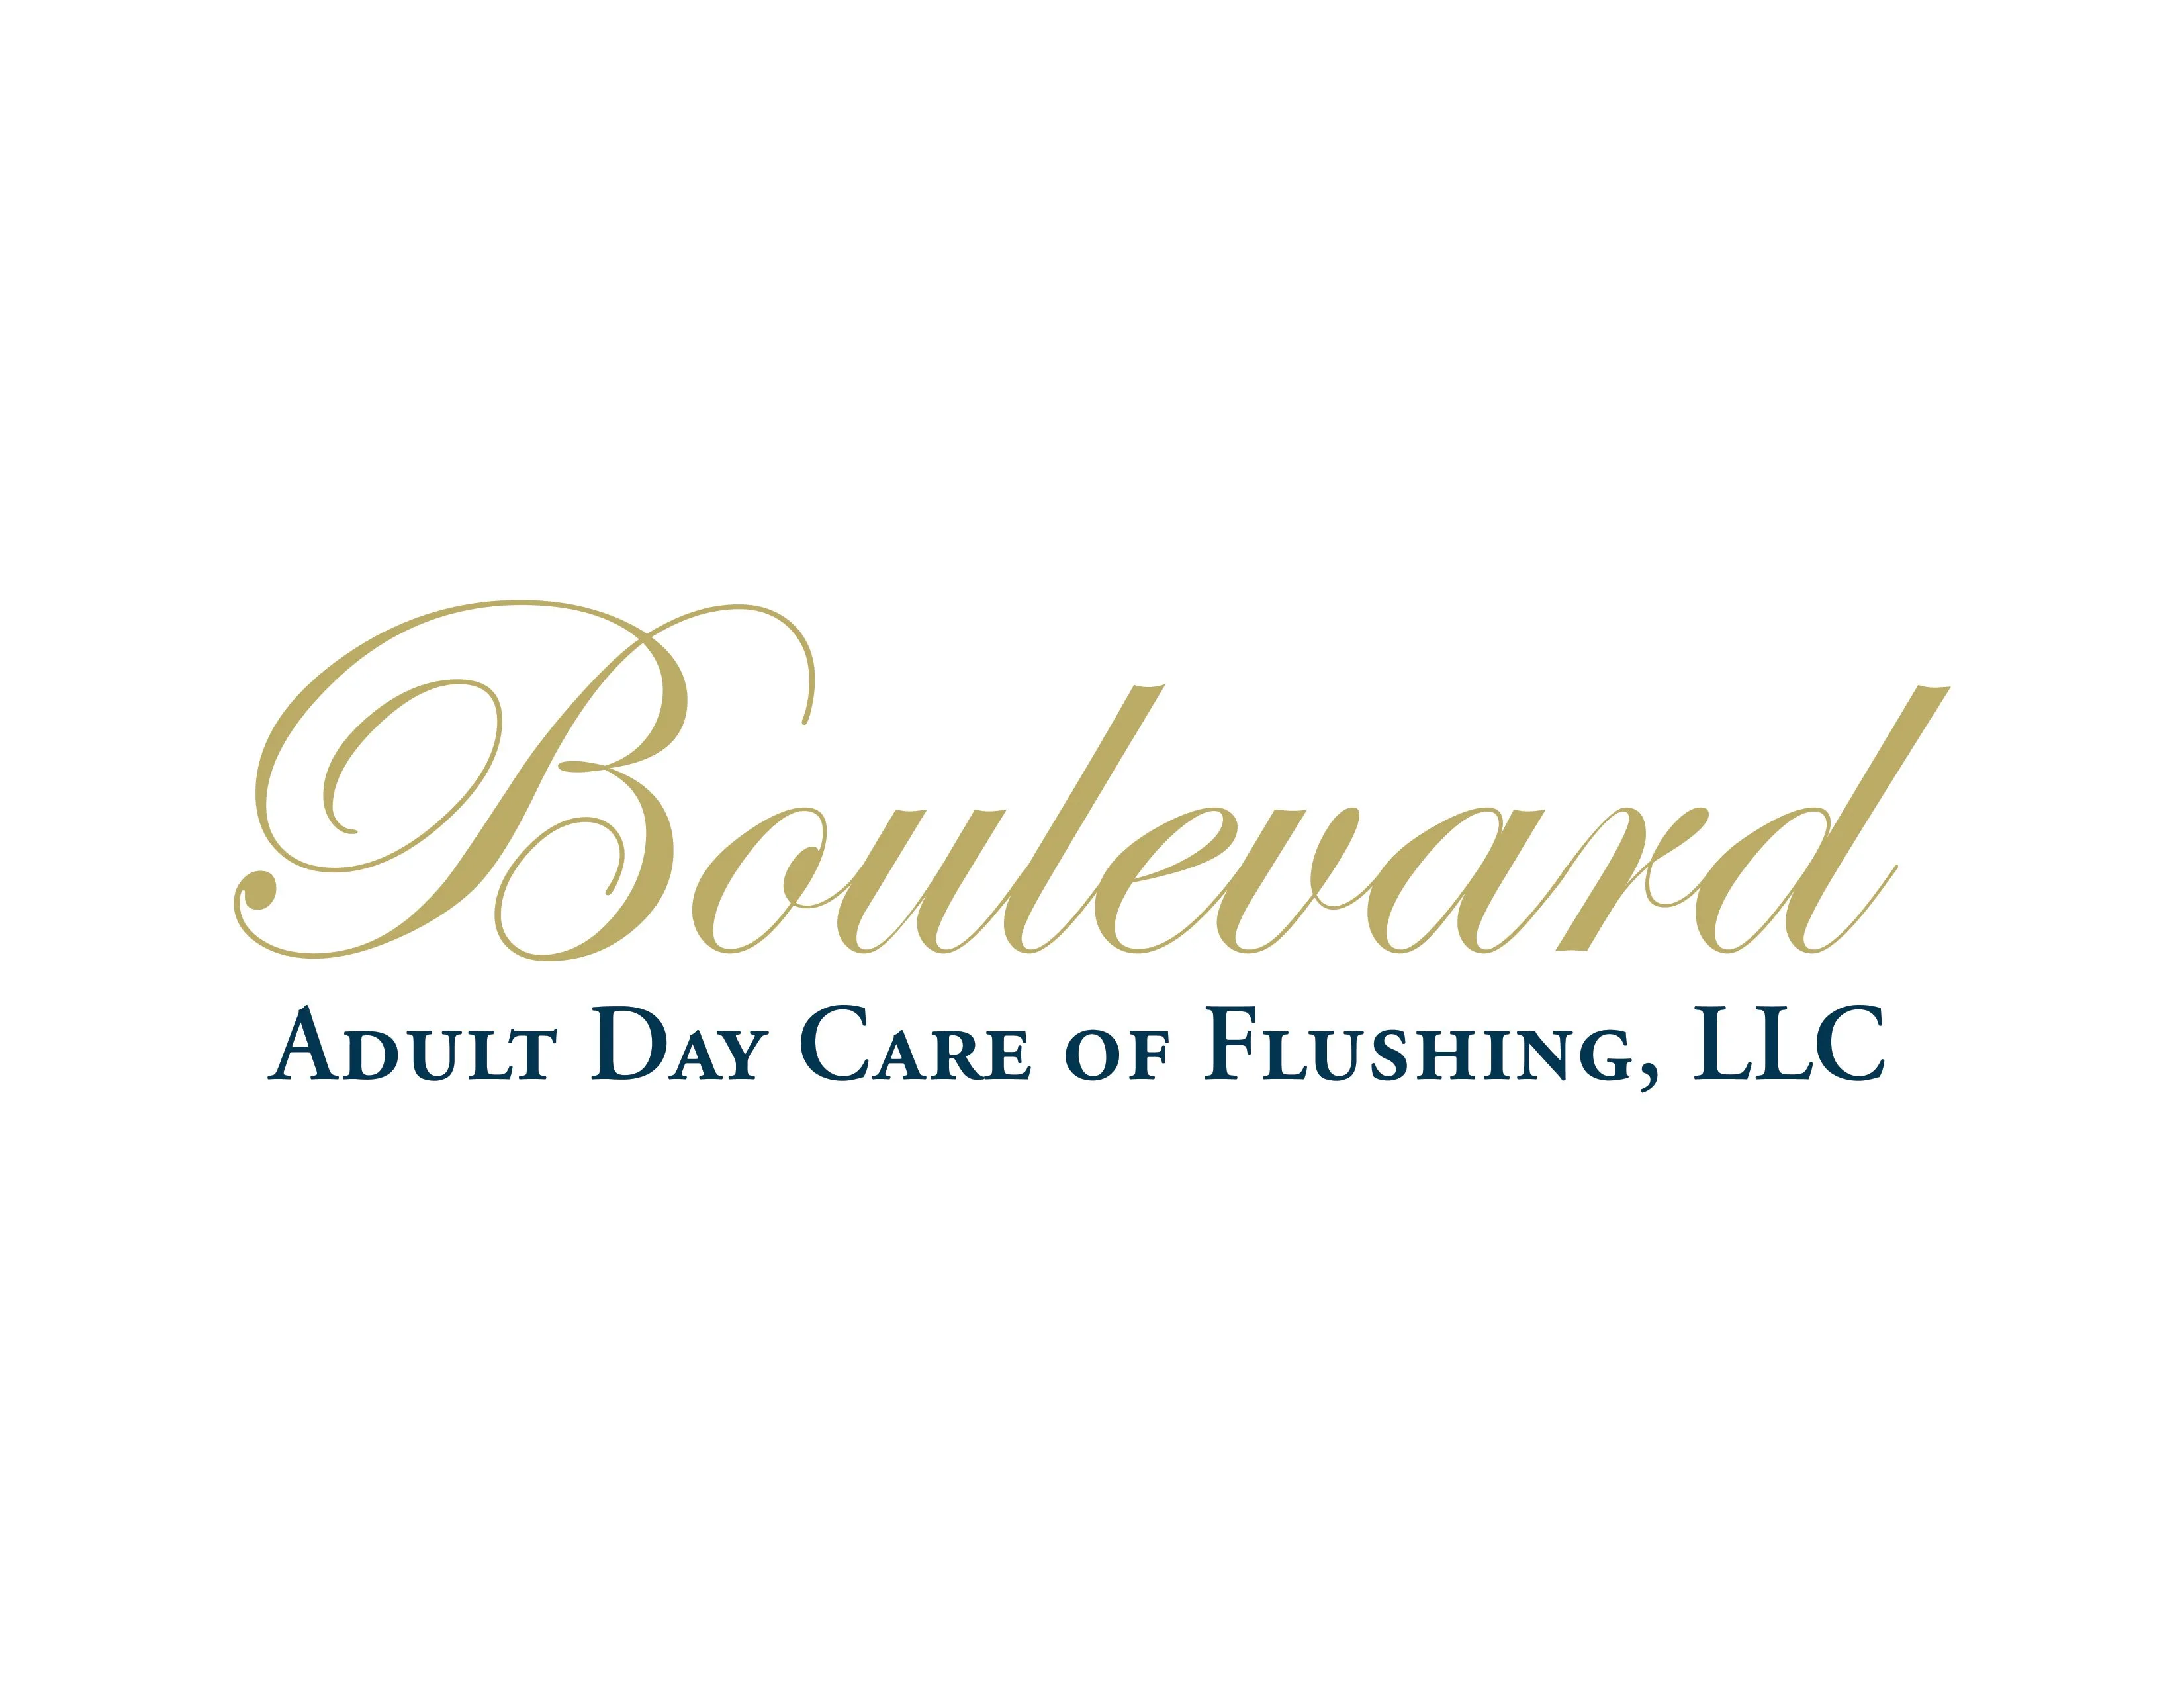 the logo for the company Boulevard Adult Day Care